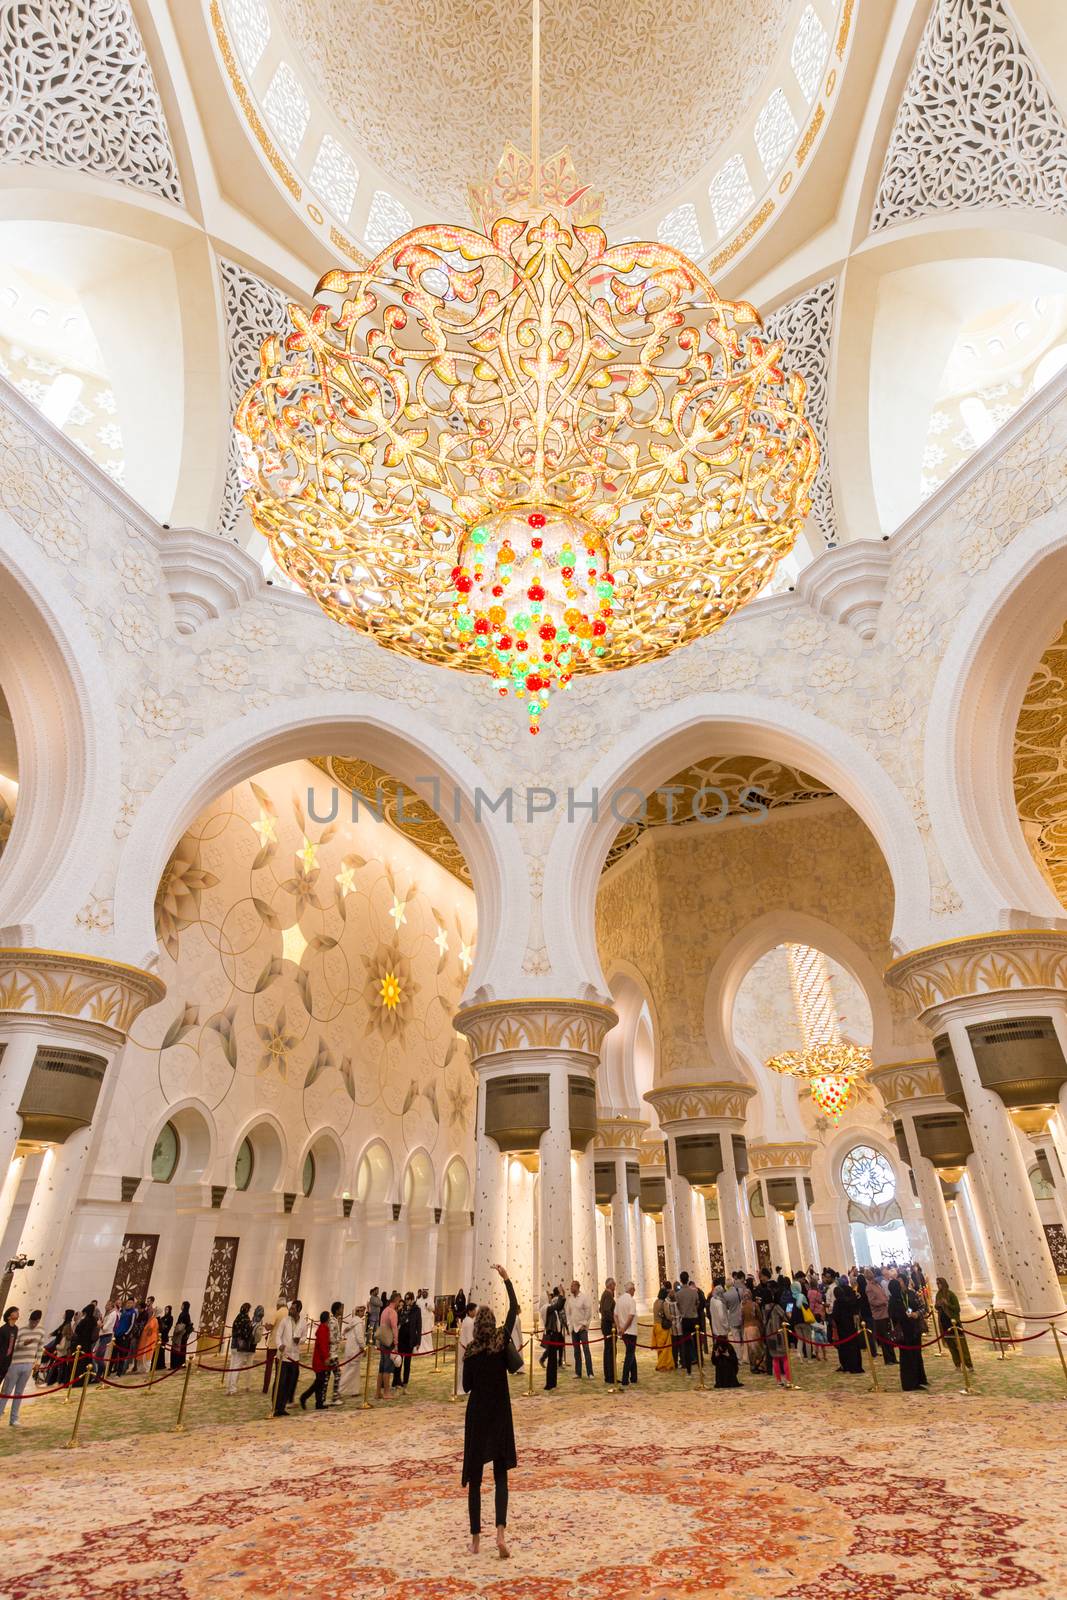 Abu Dhabi, UAE - Jan 30: Magnificent interior of Sheikh Zayed Grand Mosque on January 30th 2016 in Abu Dhabi. It is the largest mosque in UAE and the eighth largest mosque in the world.